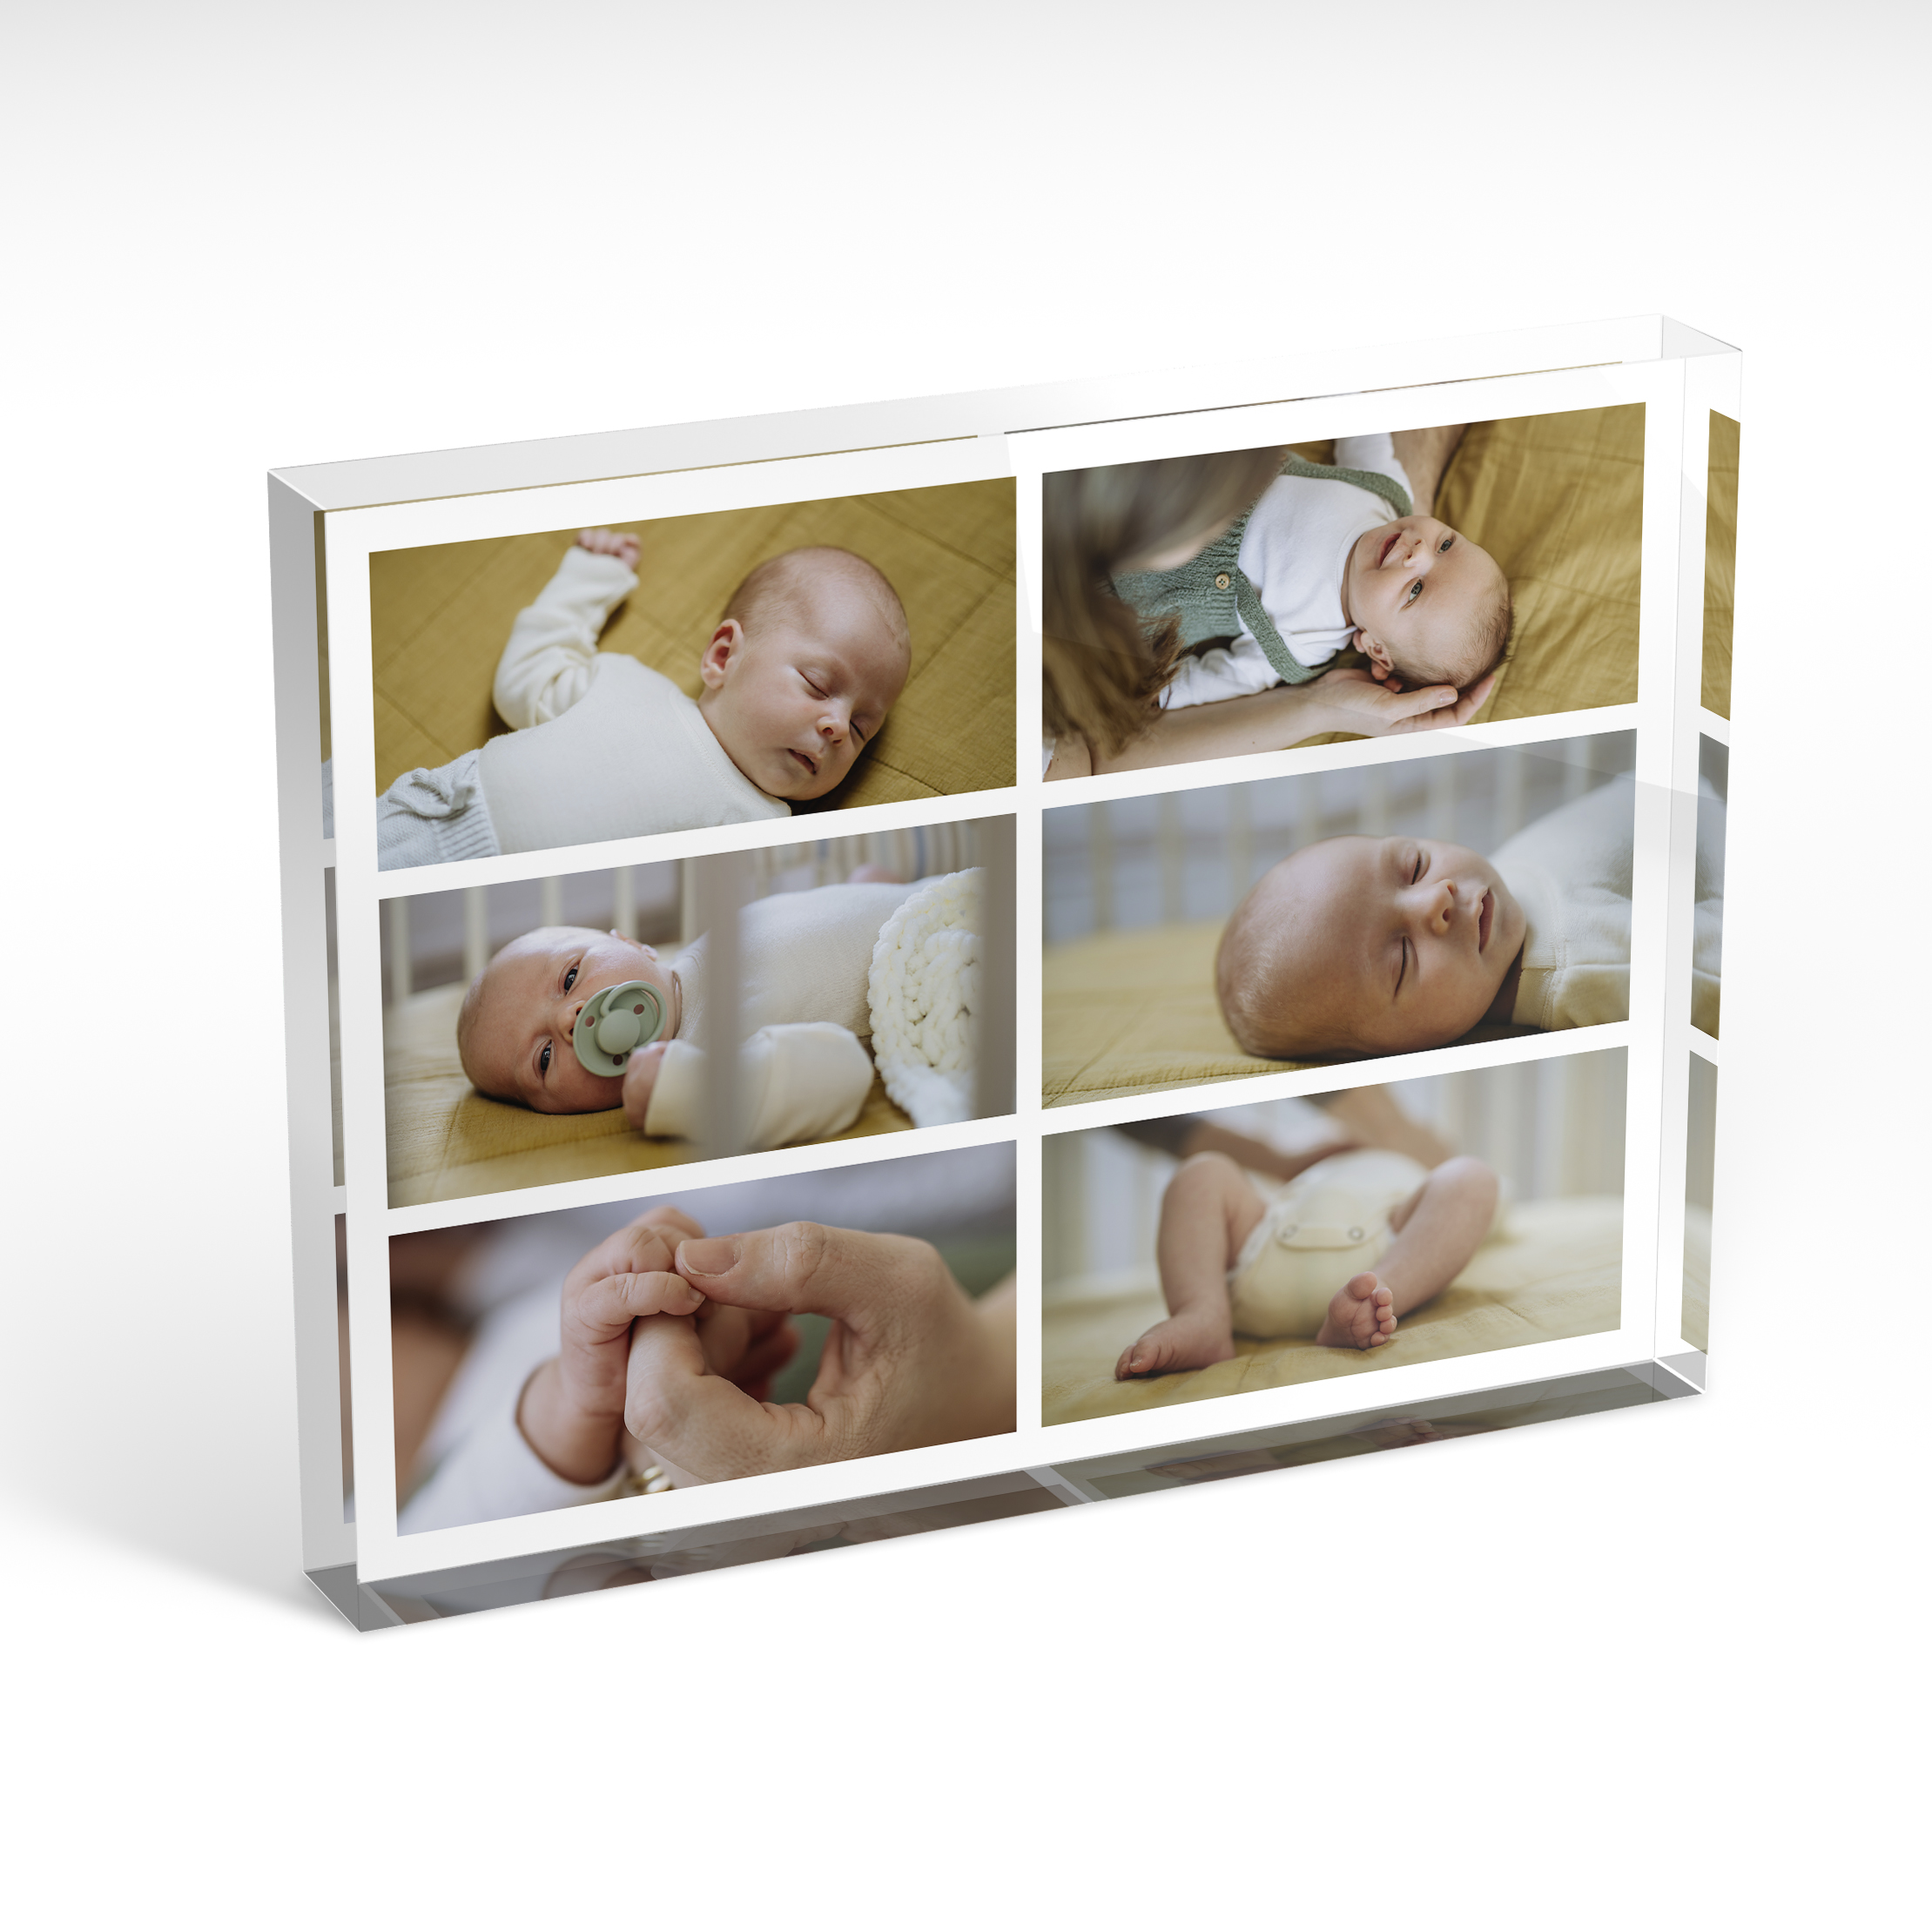 An angled side view of a landscape layout Acrylic Photo Block with space for 6 photos. Thiis design is named "Children's Mosaic". 